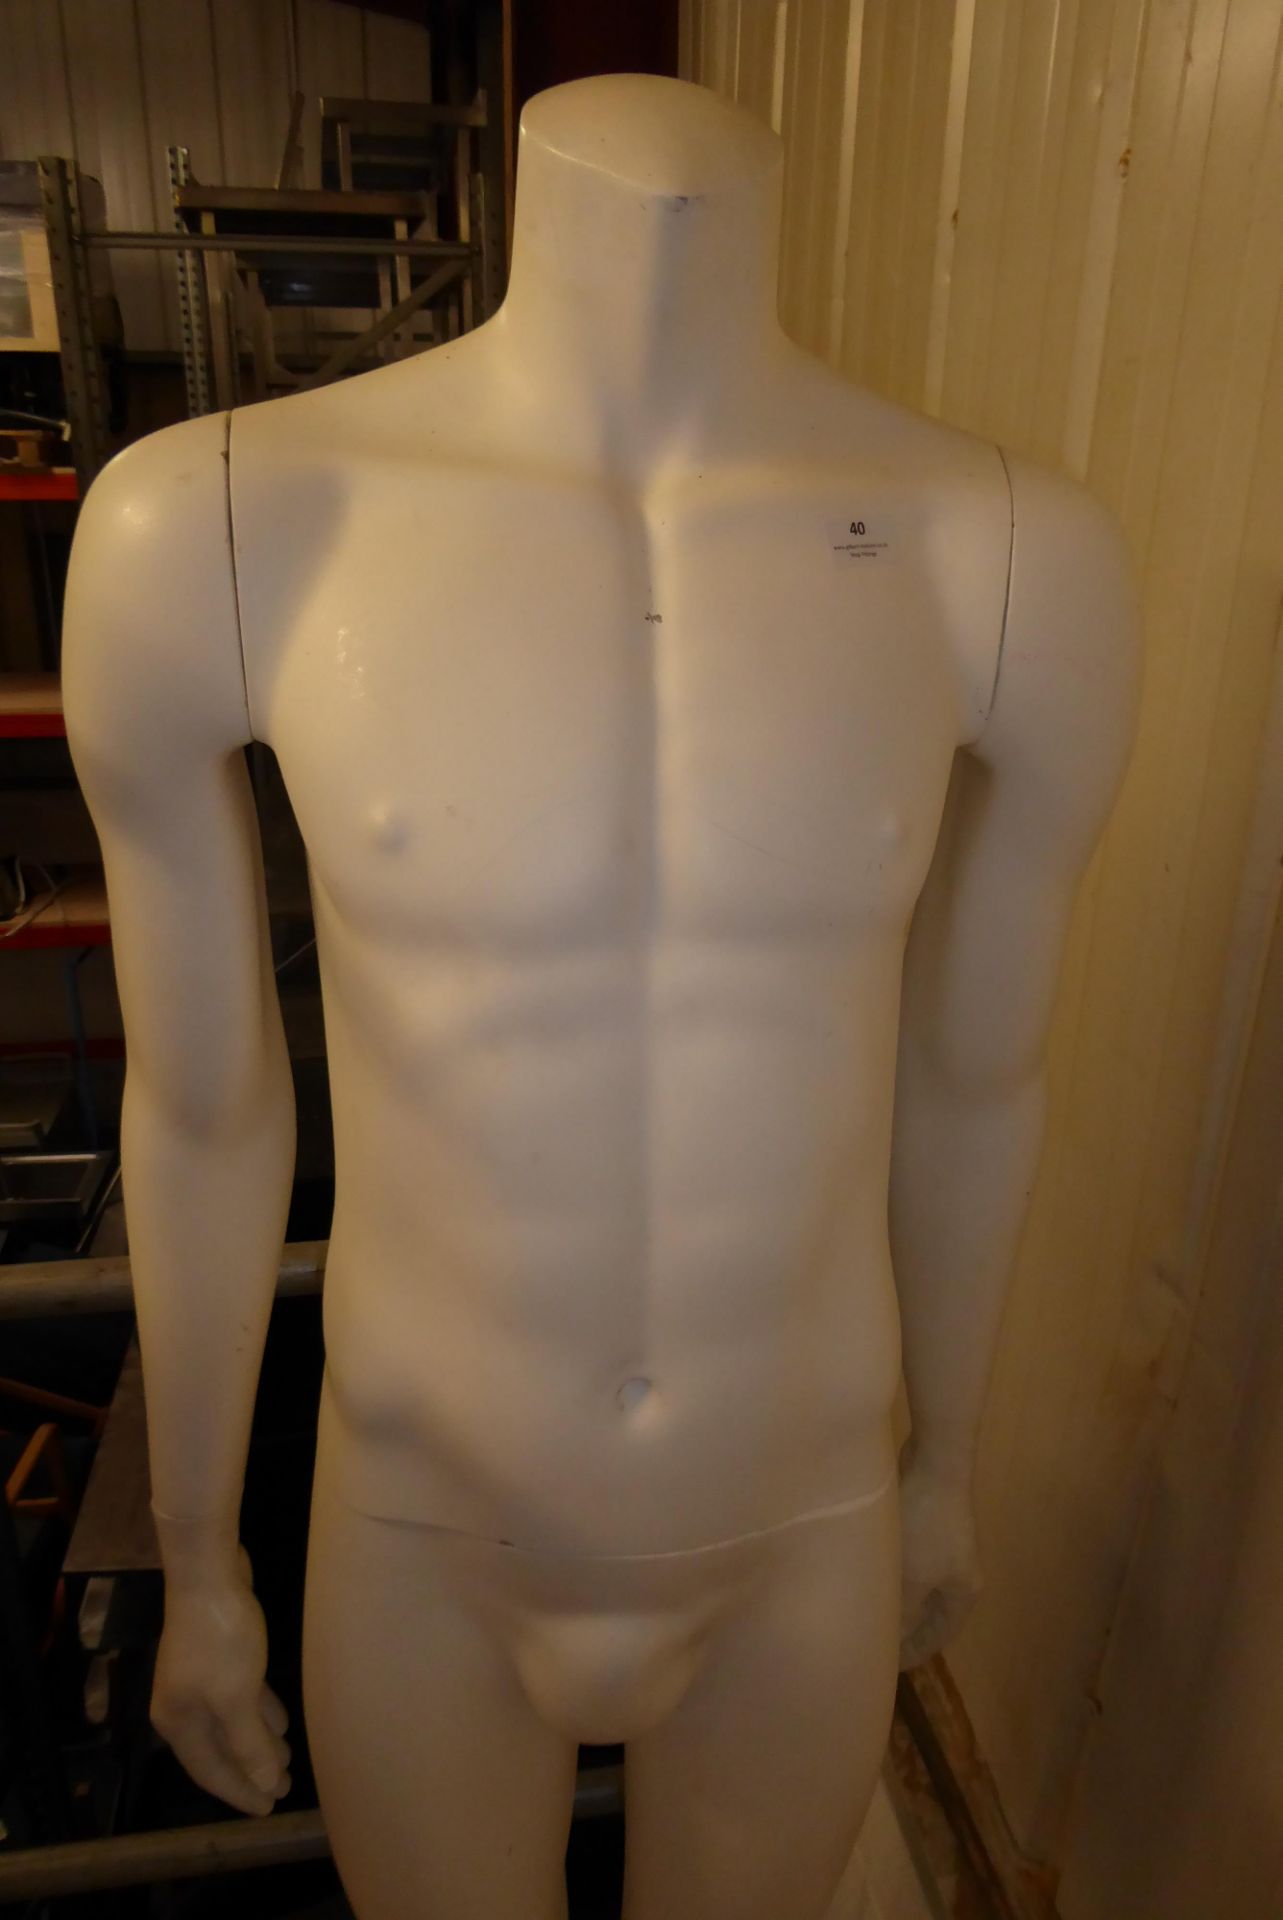 * Single headless male mannequin on stand